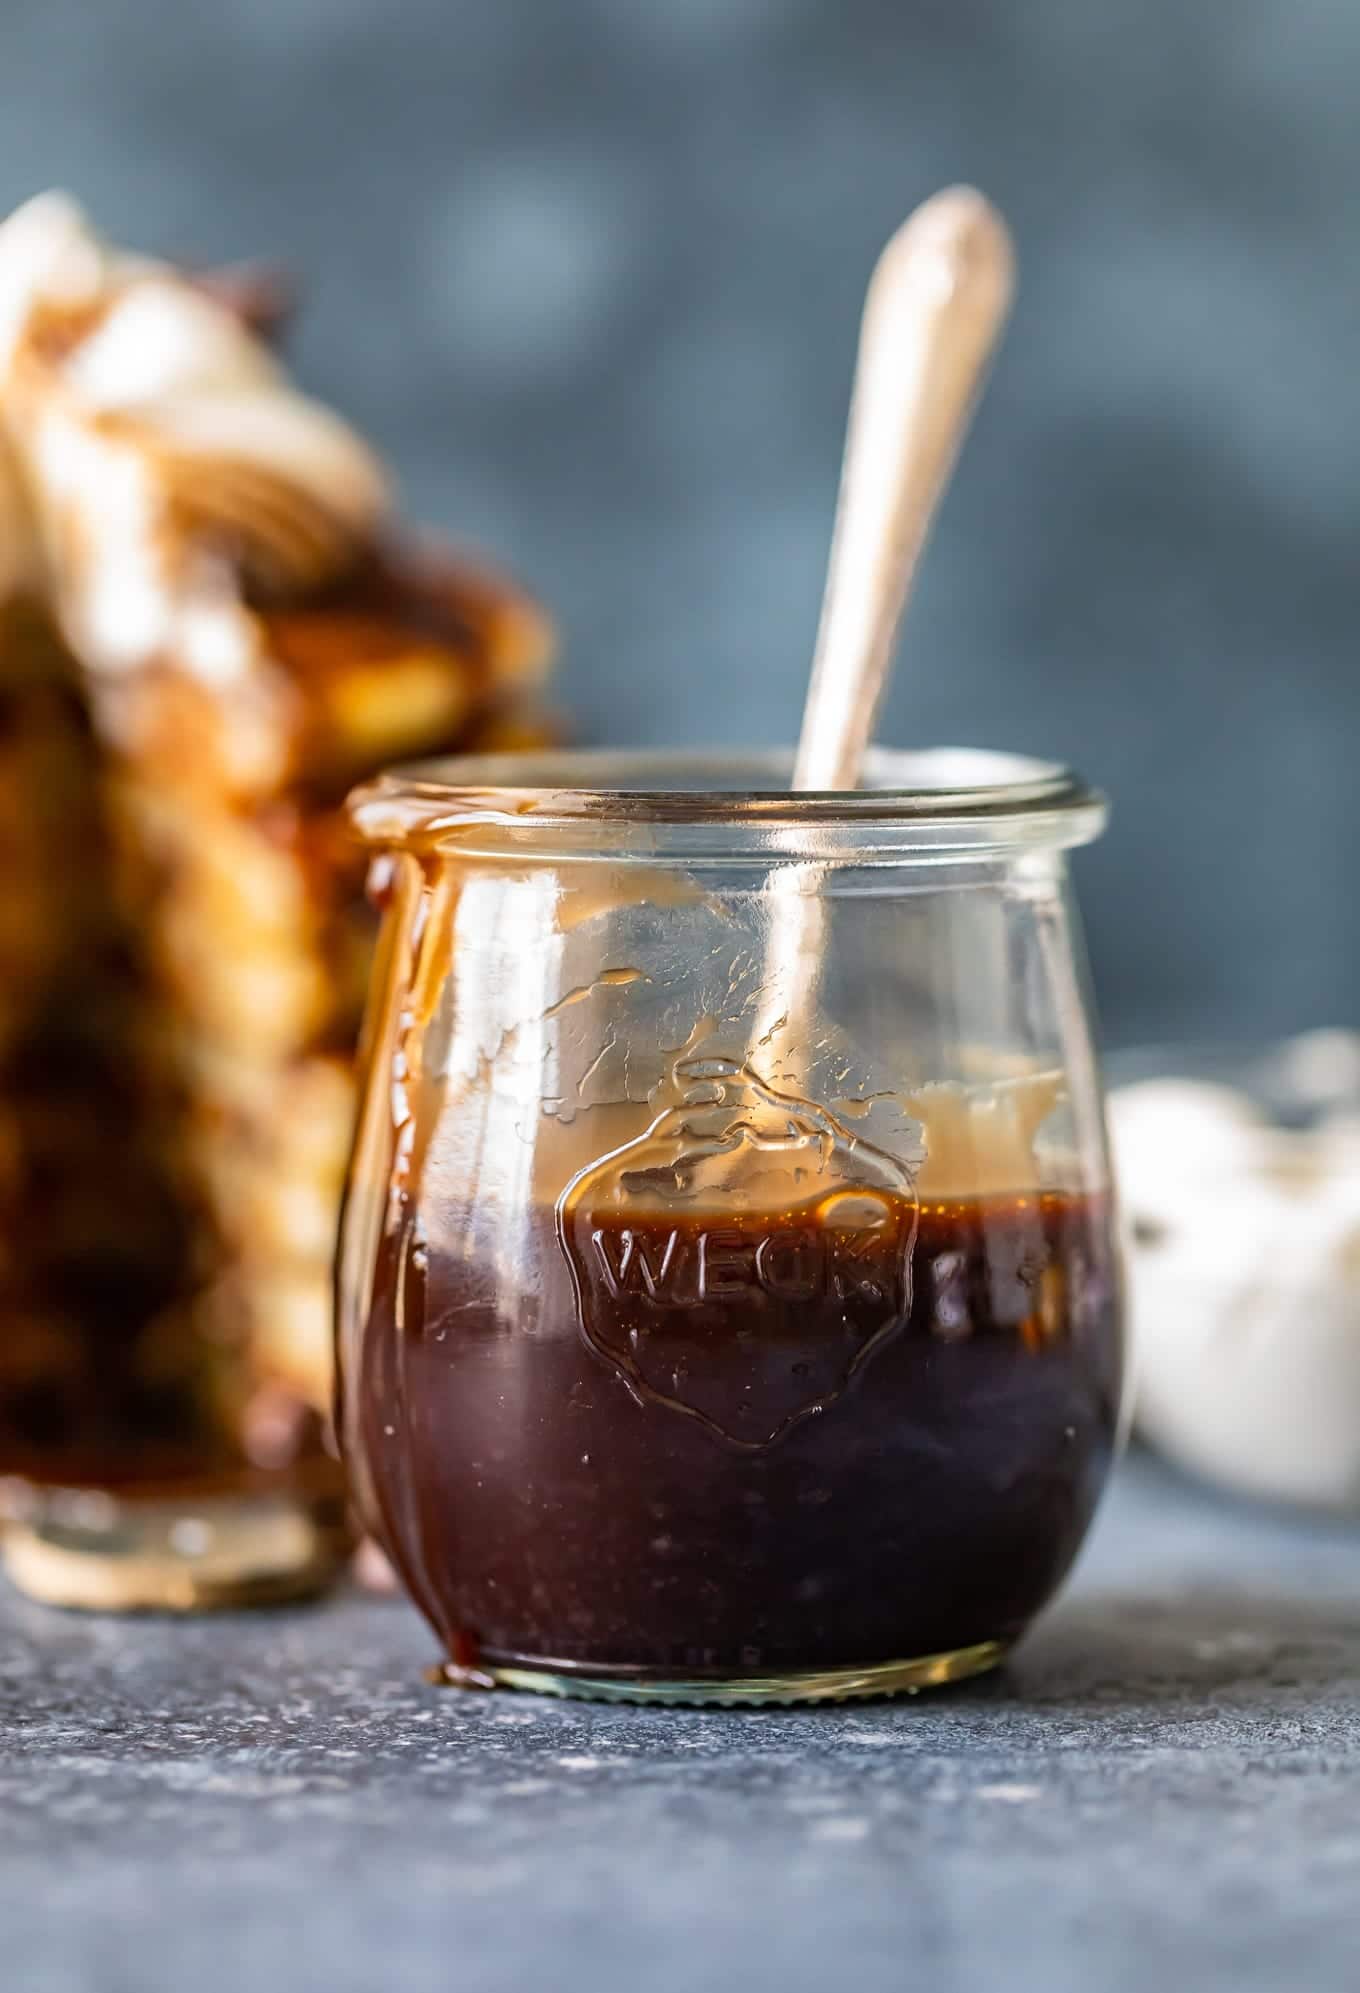 Chocolate sauce in a glass jar with a spoon